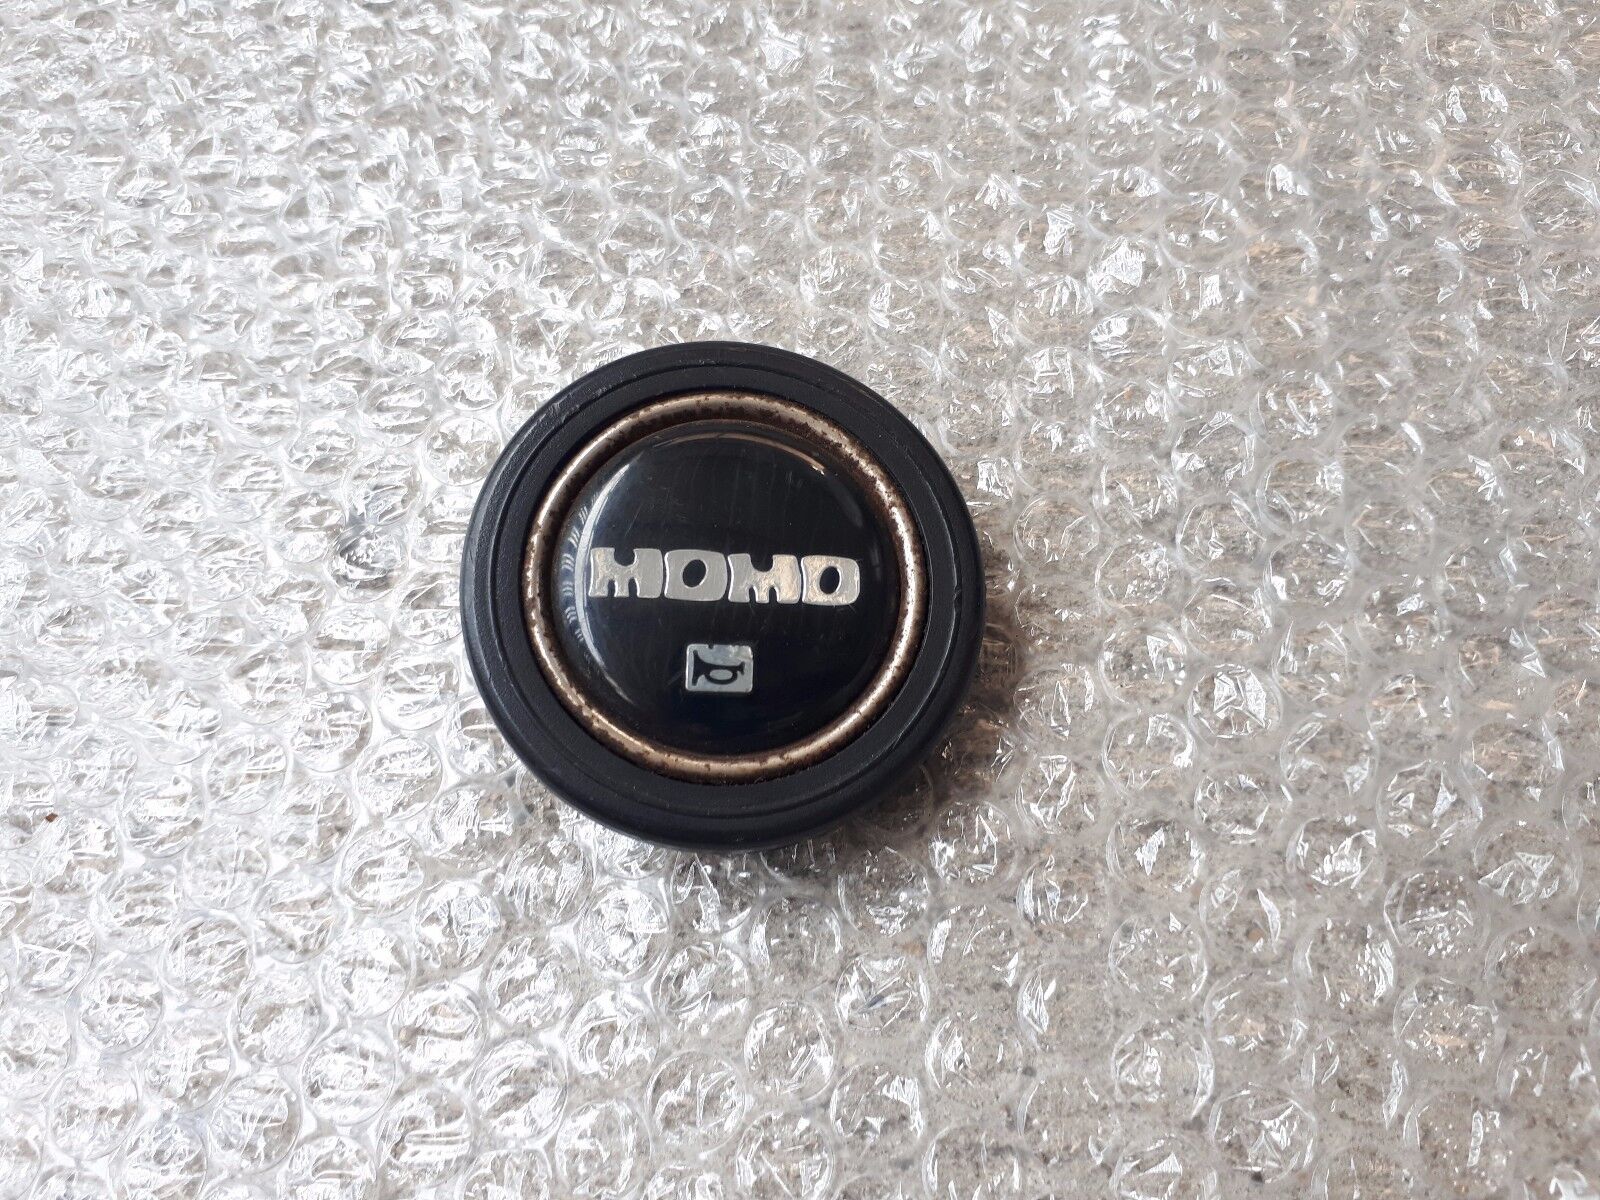 MOMO STACKED  HORN BUTTON  GREAT GENUINE  PART SUPER RARE ITEM 911 918 spyder.